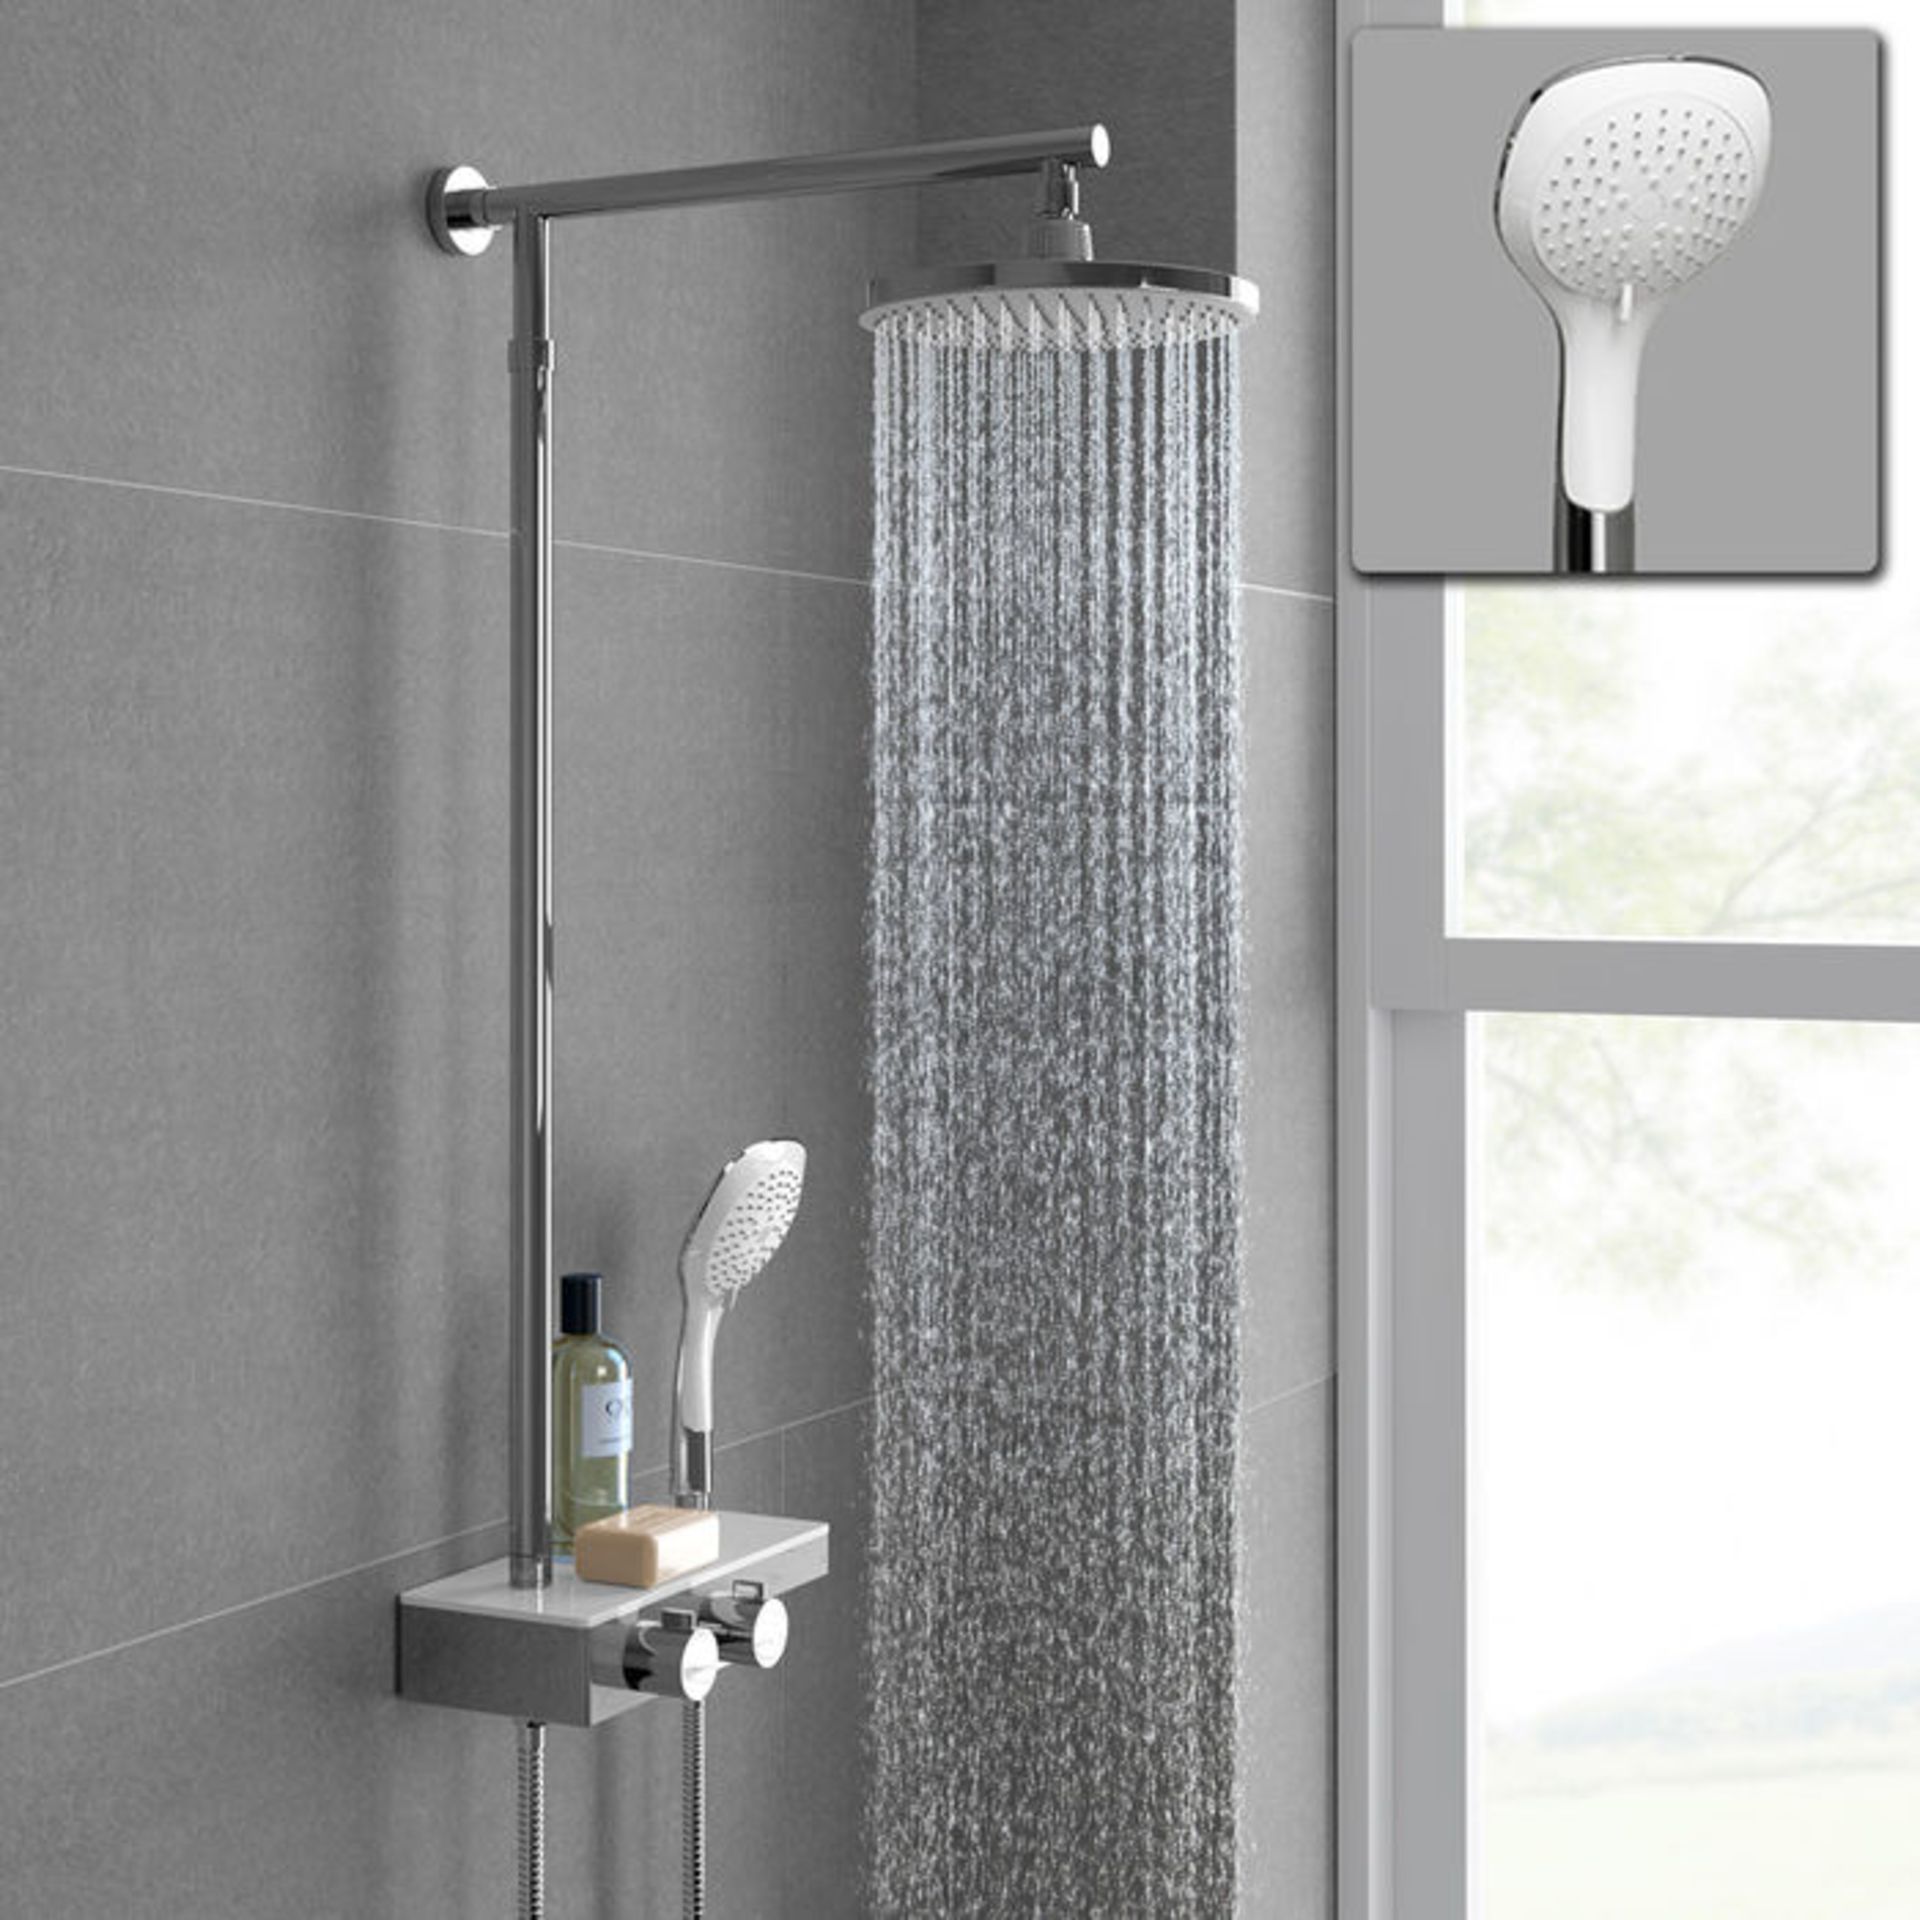 (LU123) Round Exposed Thermostatic Mixer Shower Kit Medium Head & Shelf. Cool to touch shower for - Bild 4 aus 5